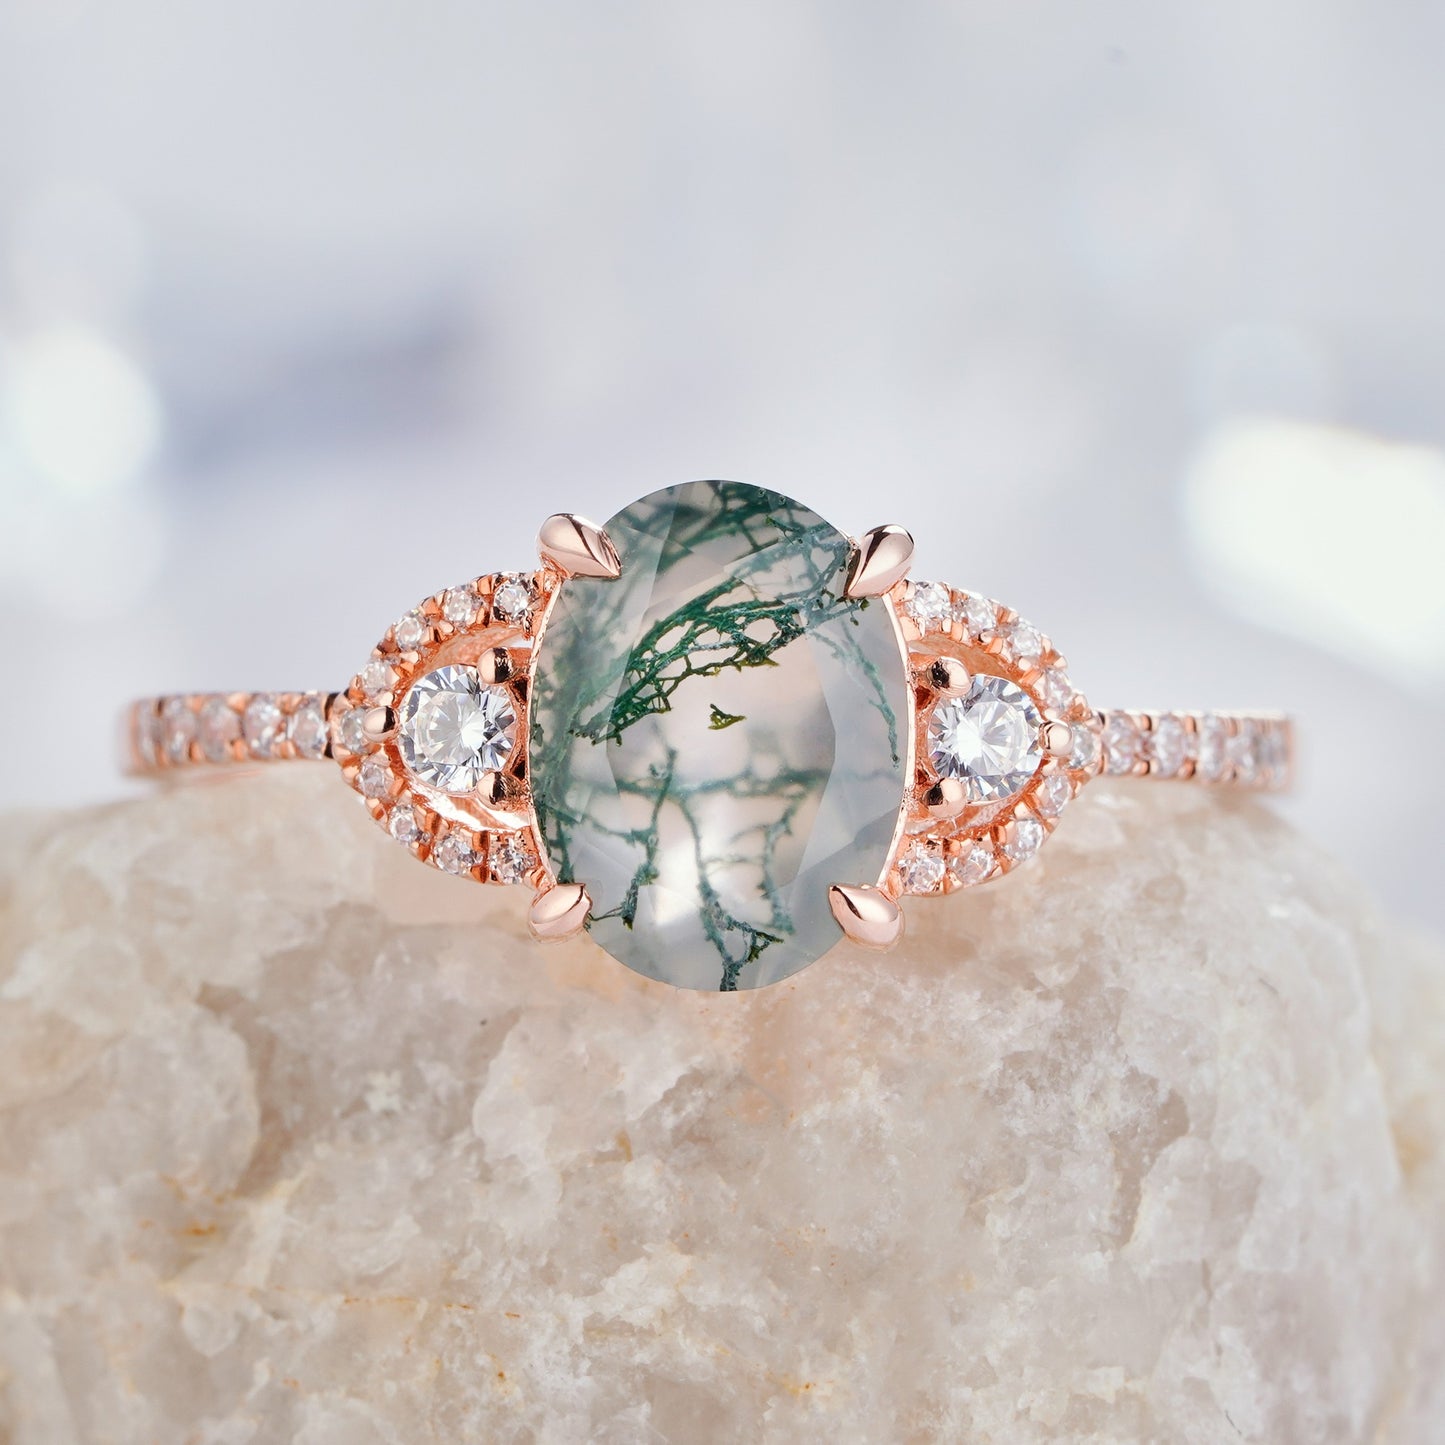 Oval cut Moss agate Engagement Ring Solid14K/18K Gold Diamond Ring - ShainJewelry